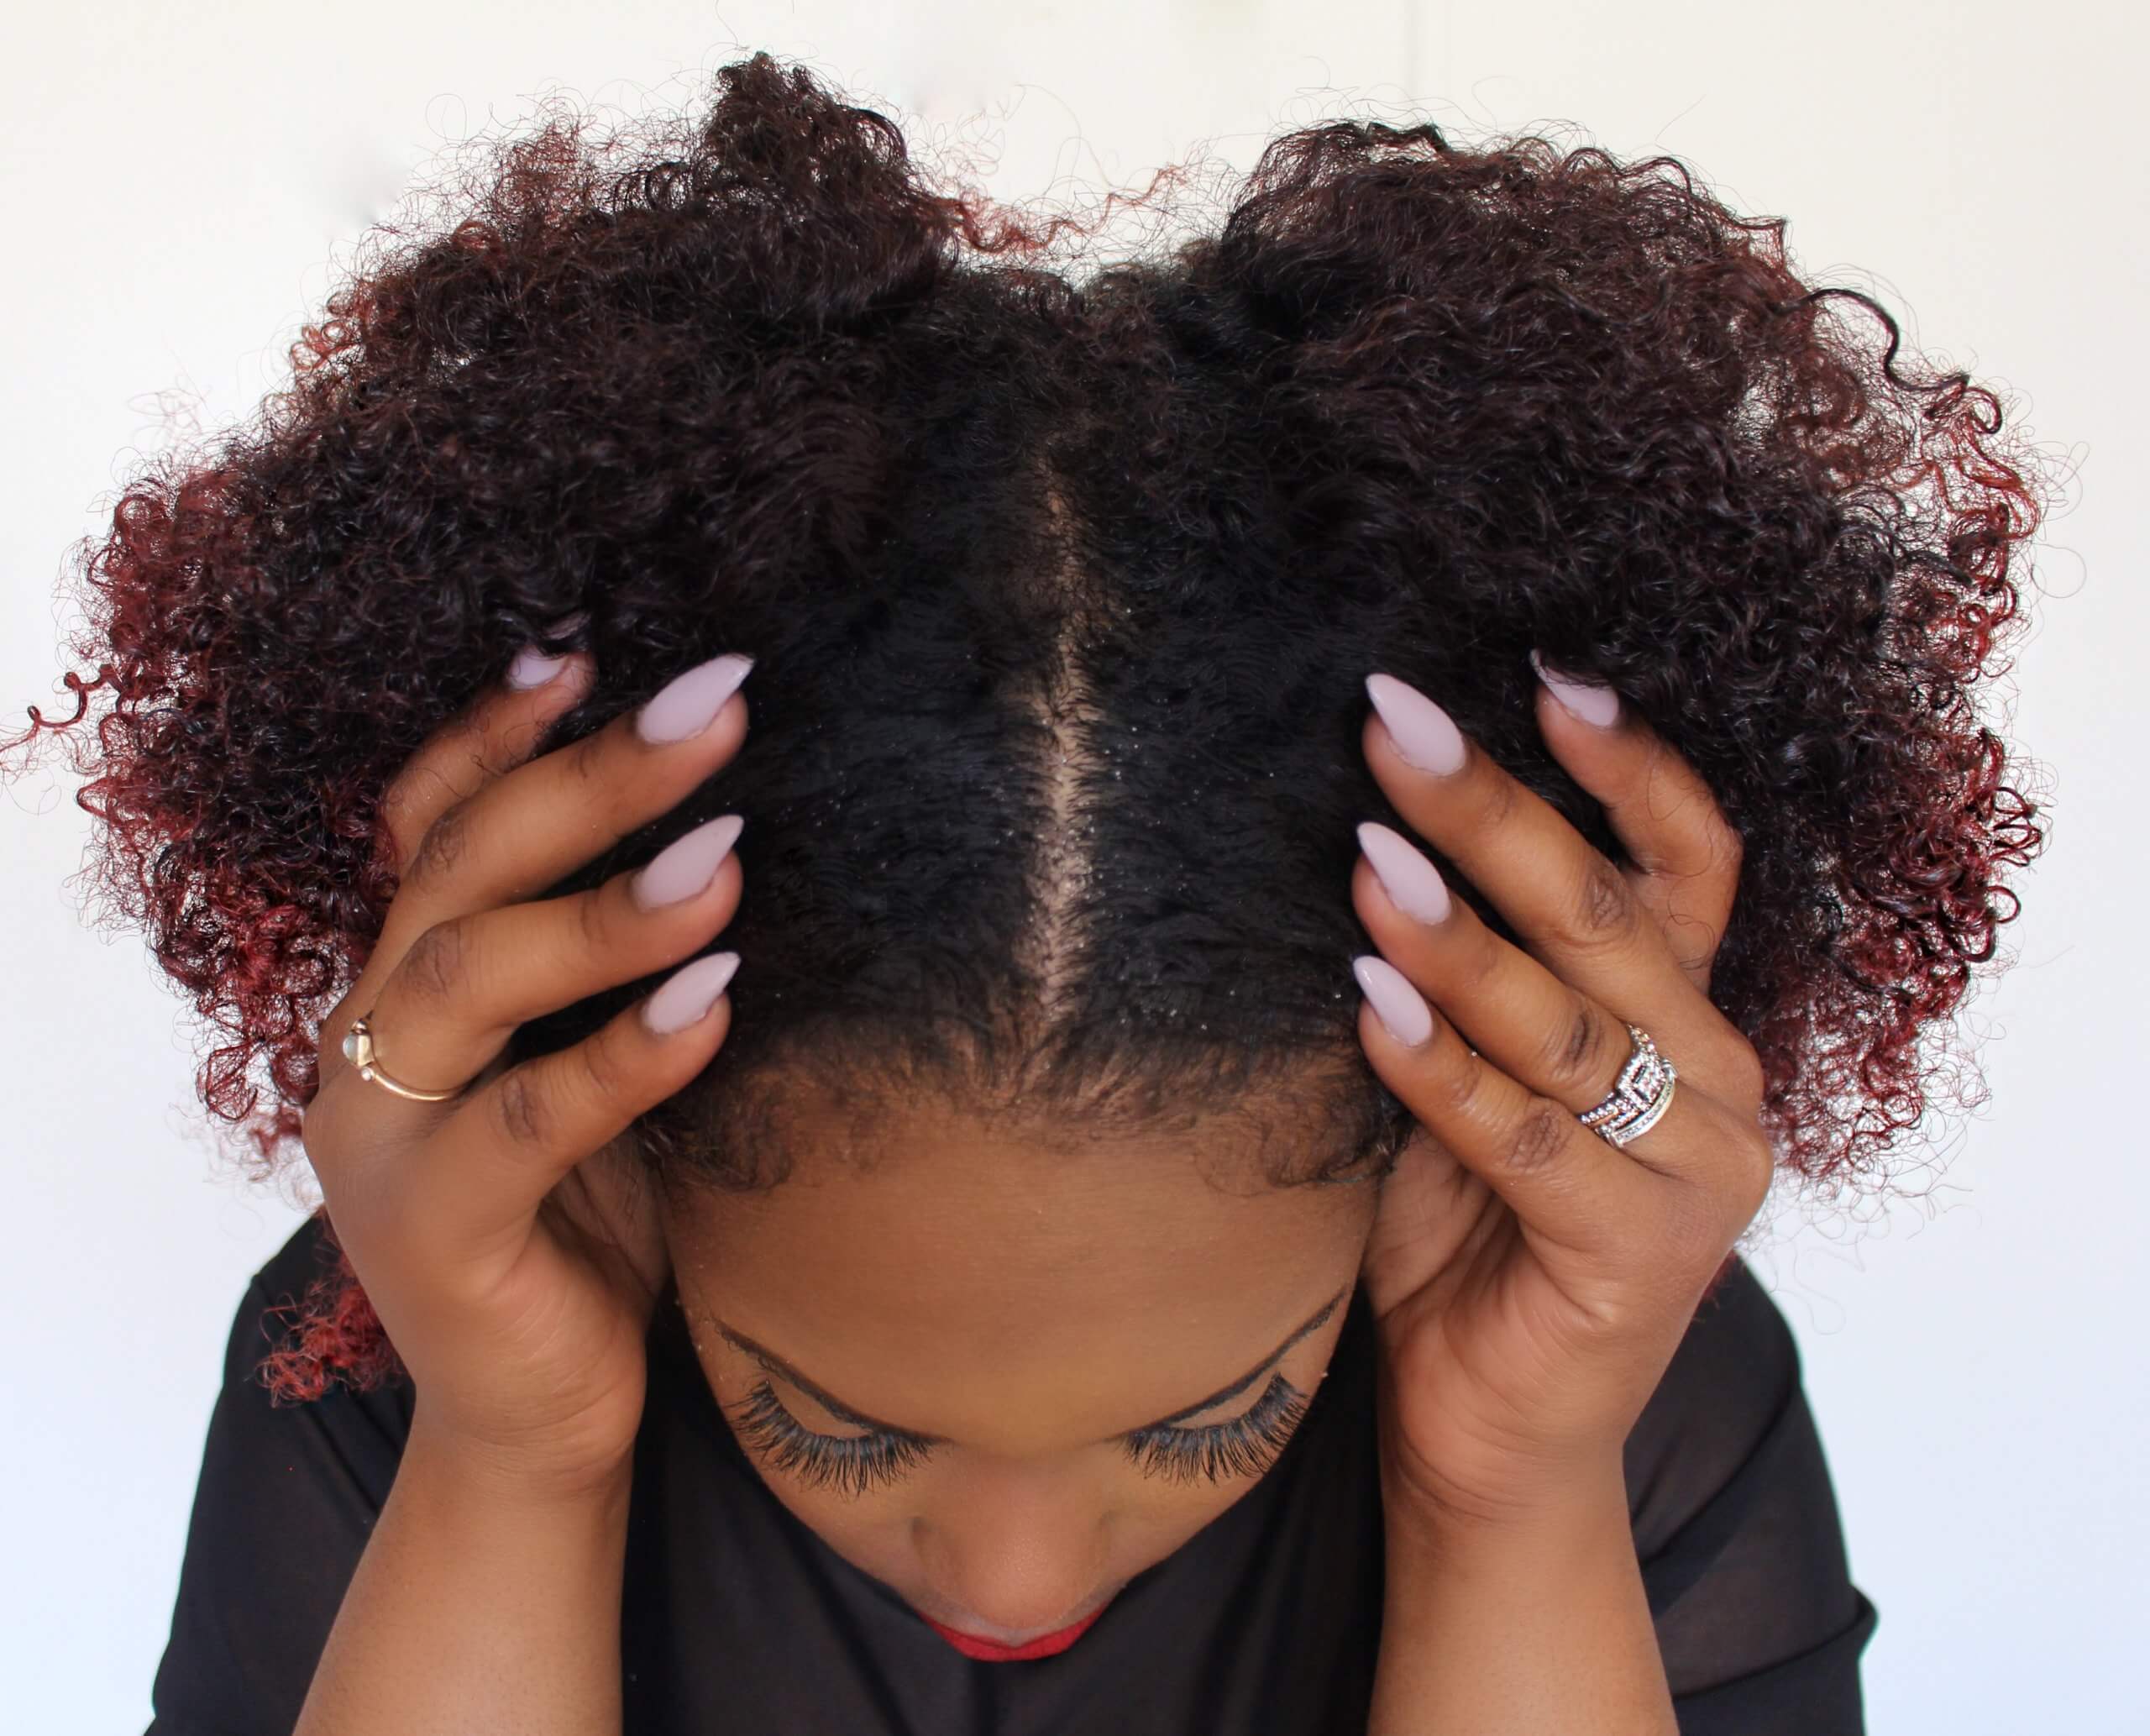 Scalp care for natural hair